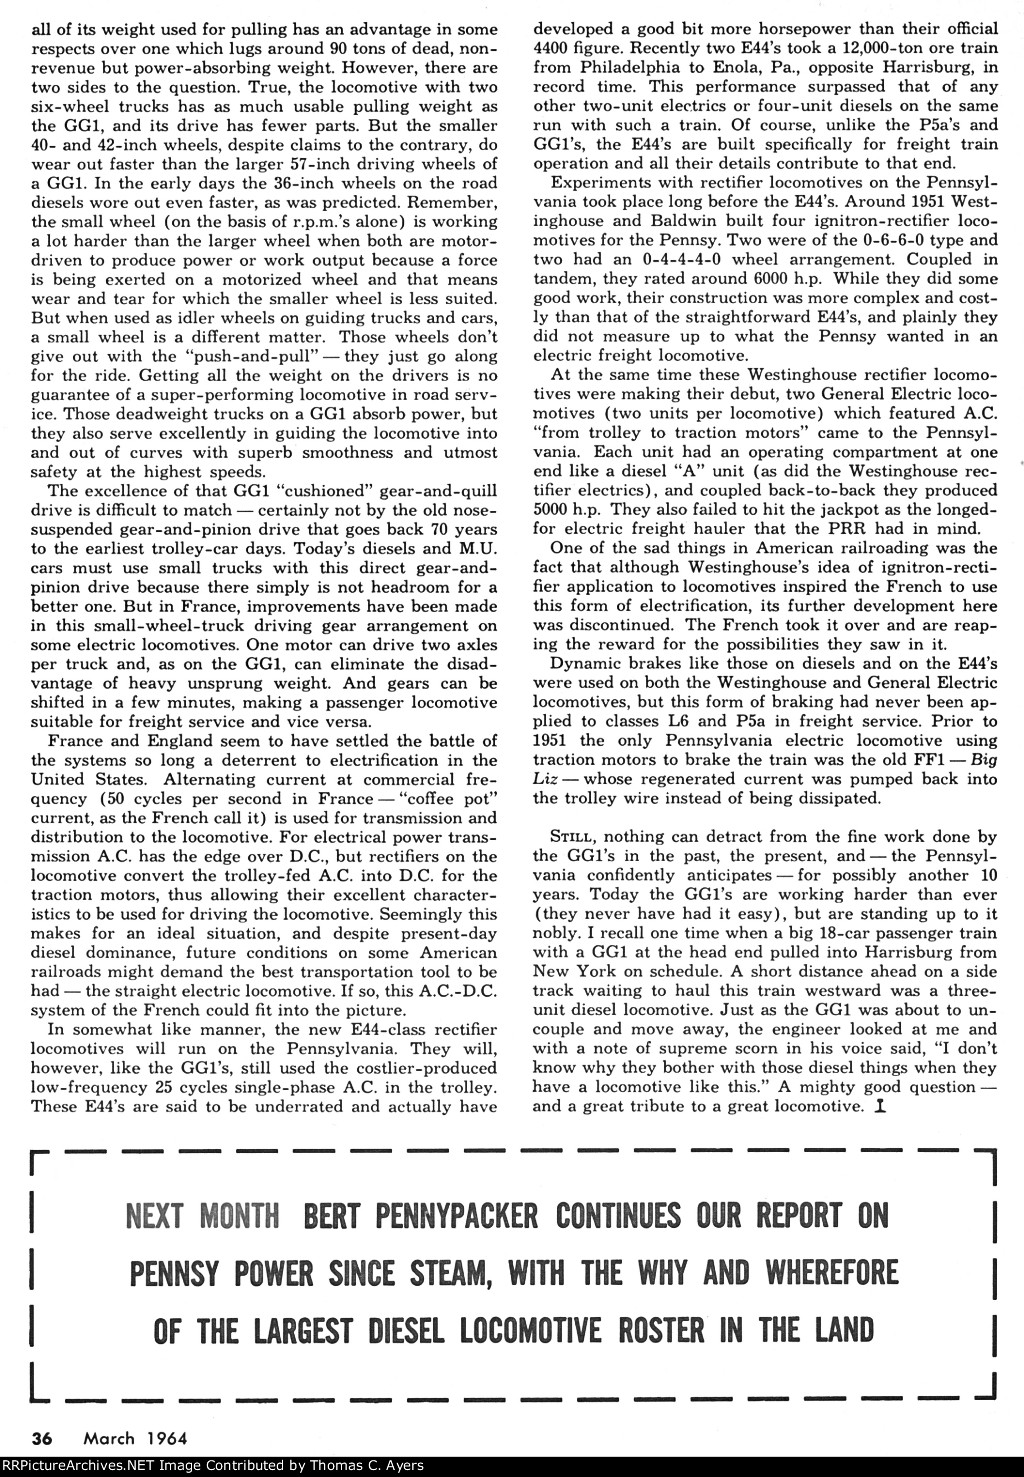 Story Of The GG-1, Page 36, 1964